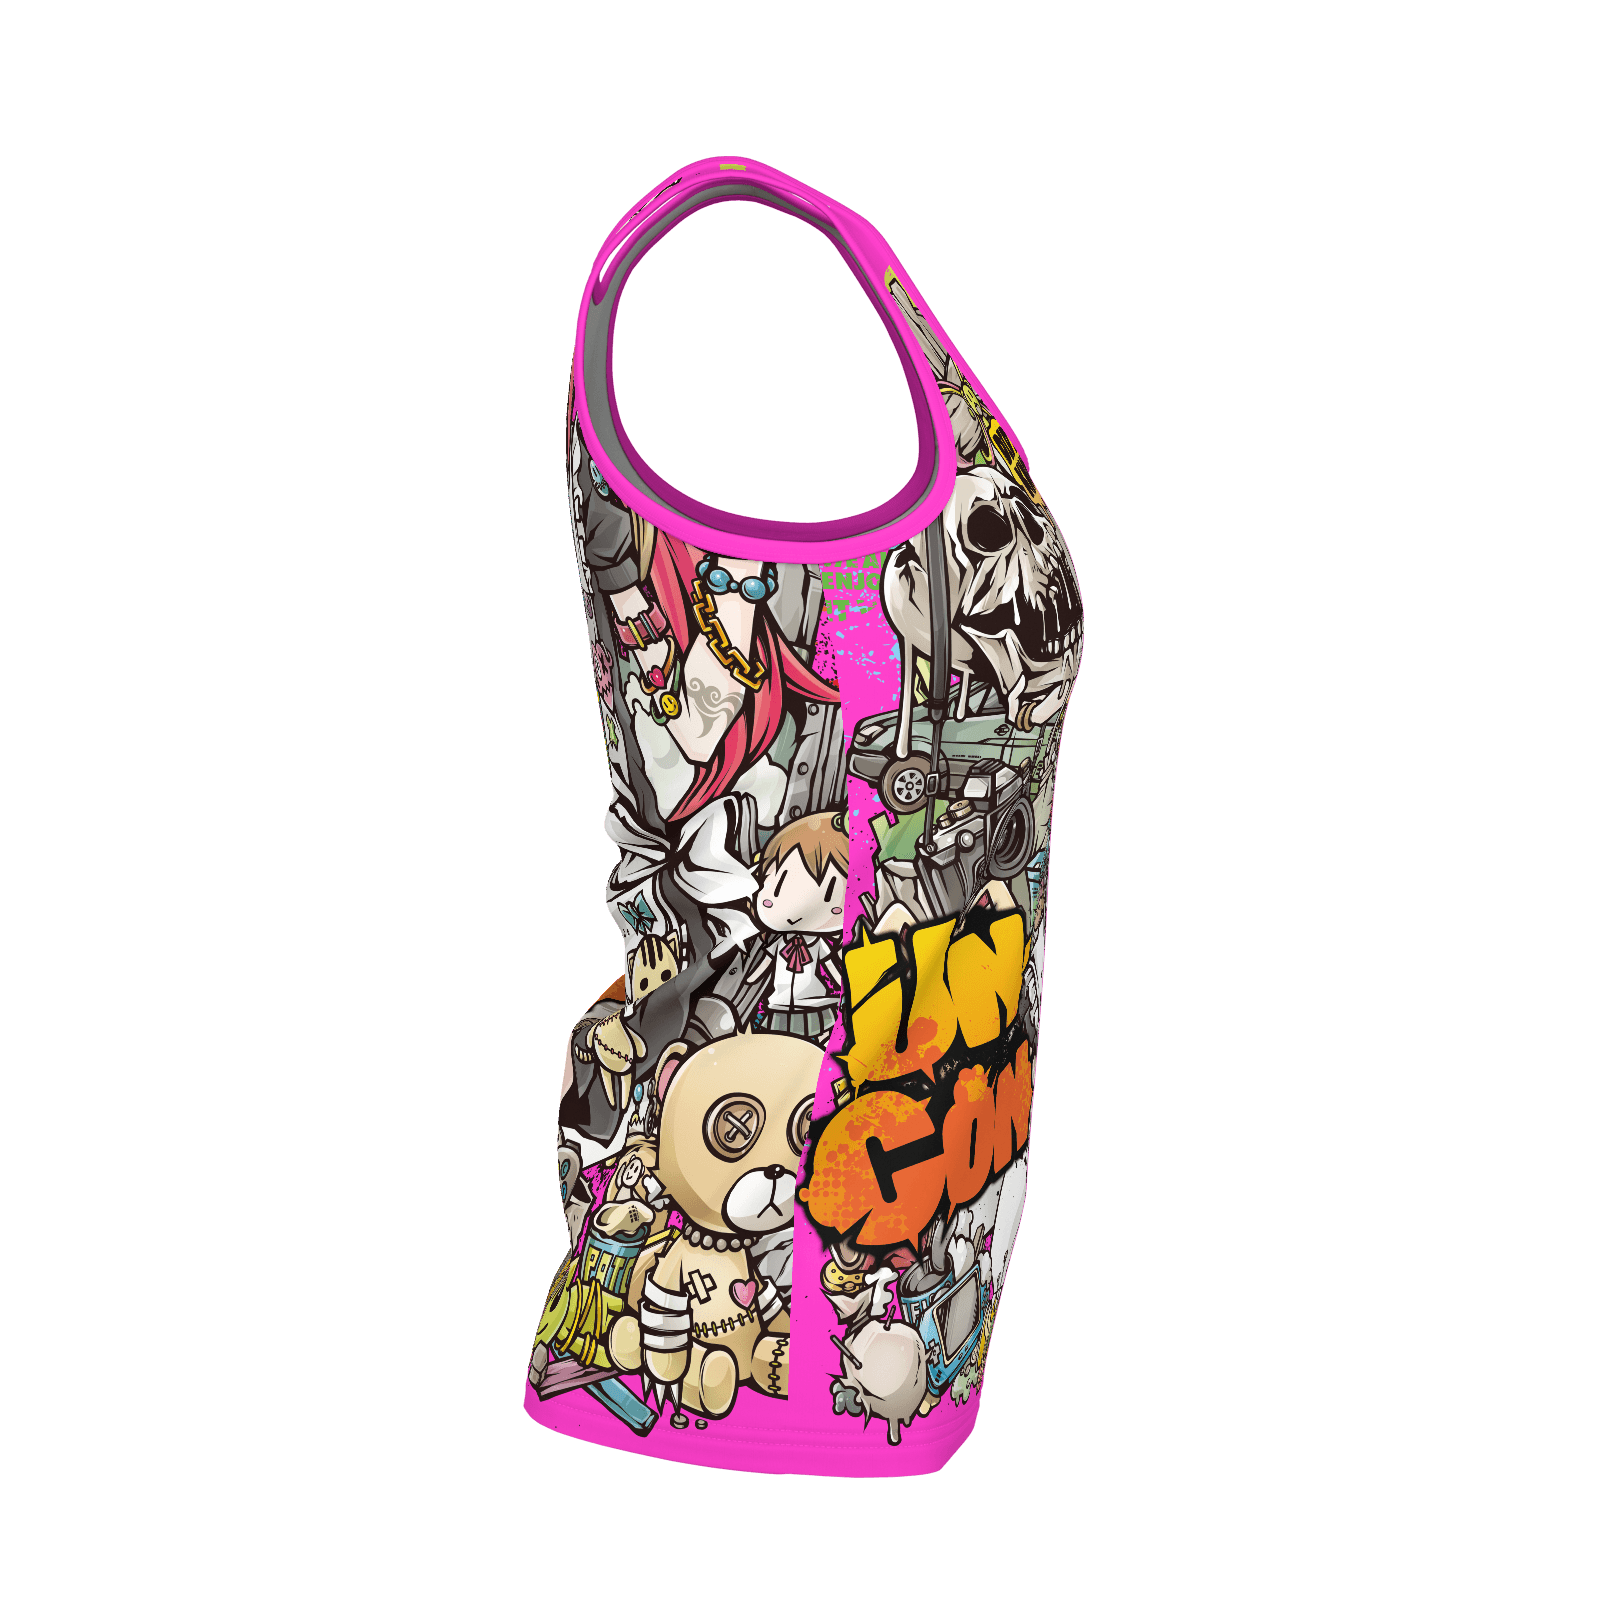 PROJECT.C.K. - Uncon (Tank, Woman, Pink) POLY 2019